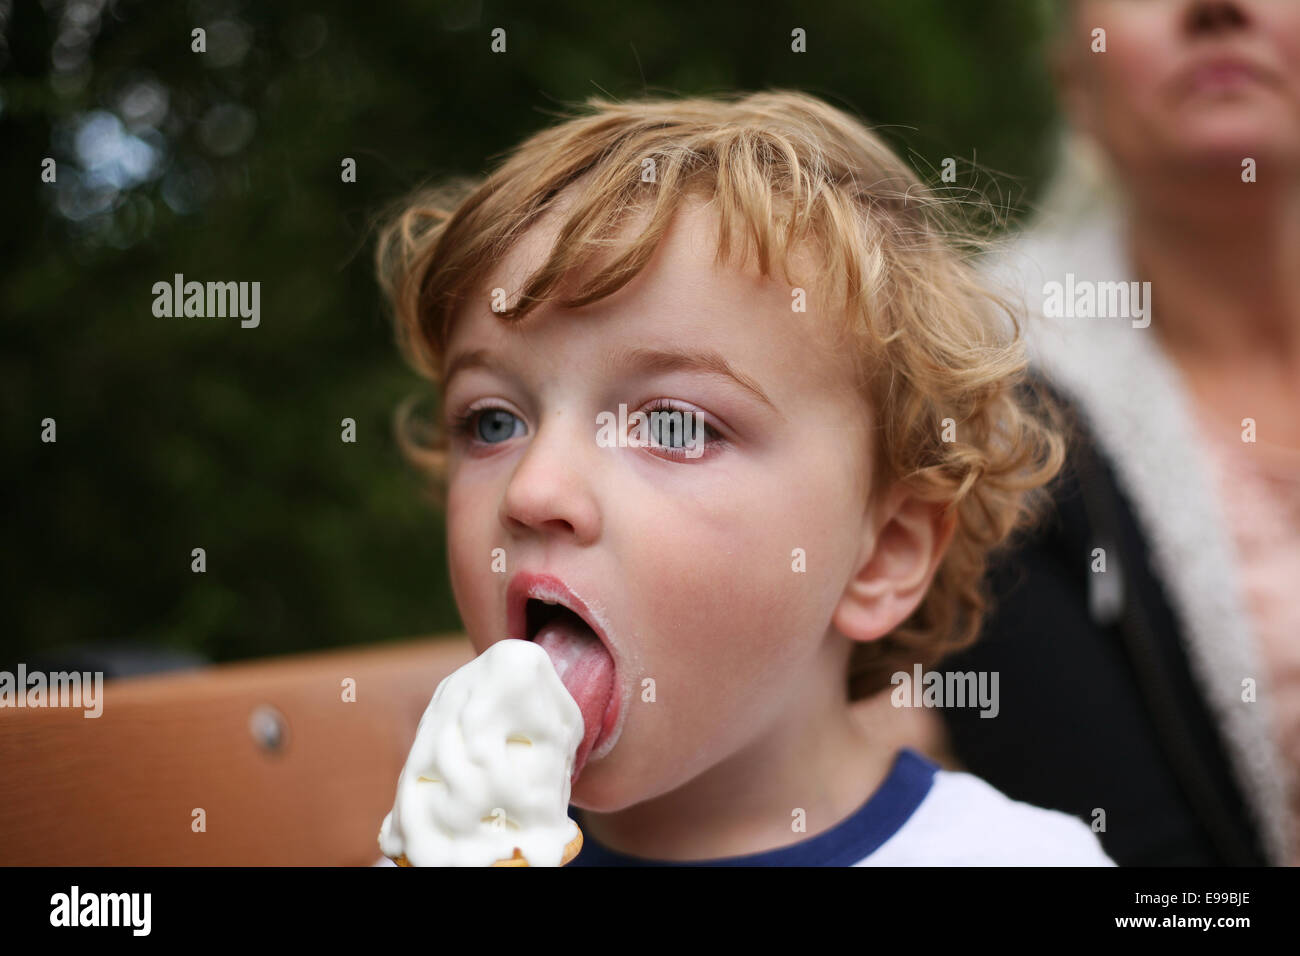 little boy eating ice cream with mum in background Stock Photo